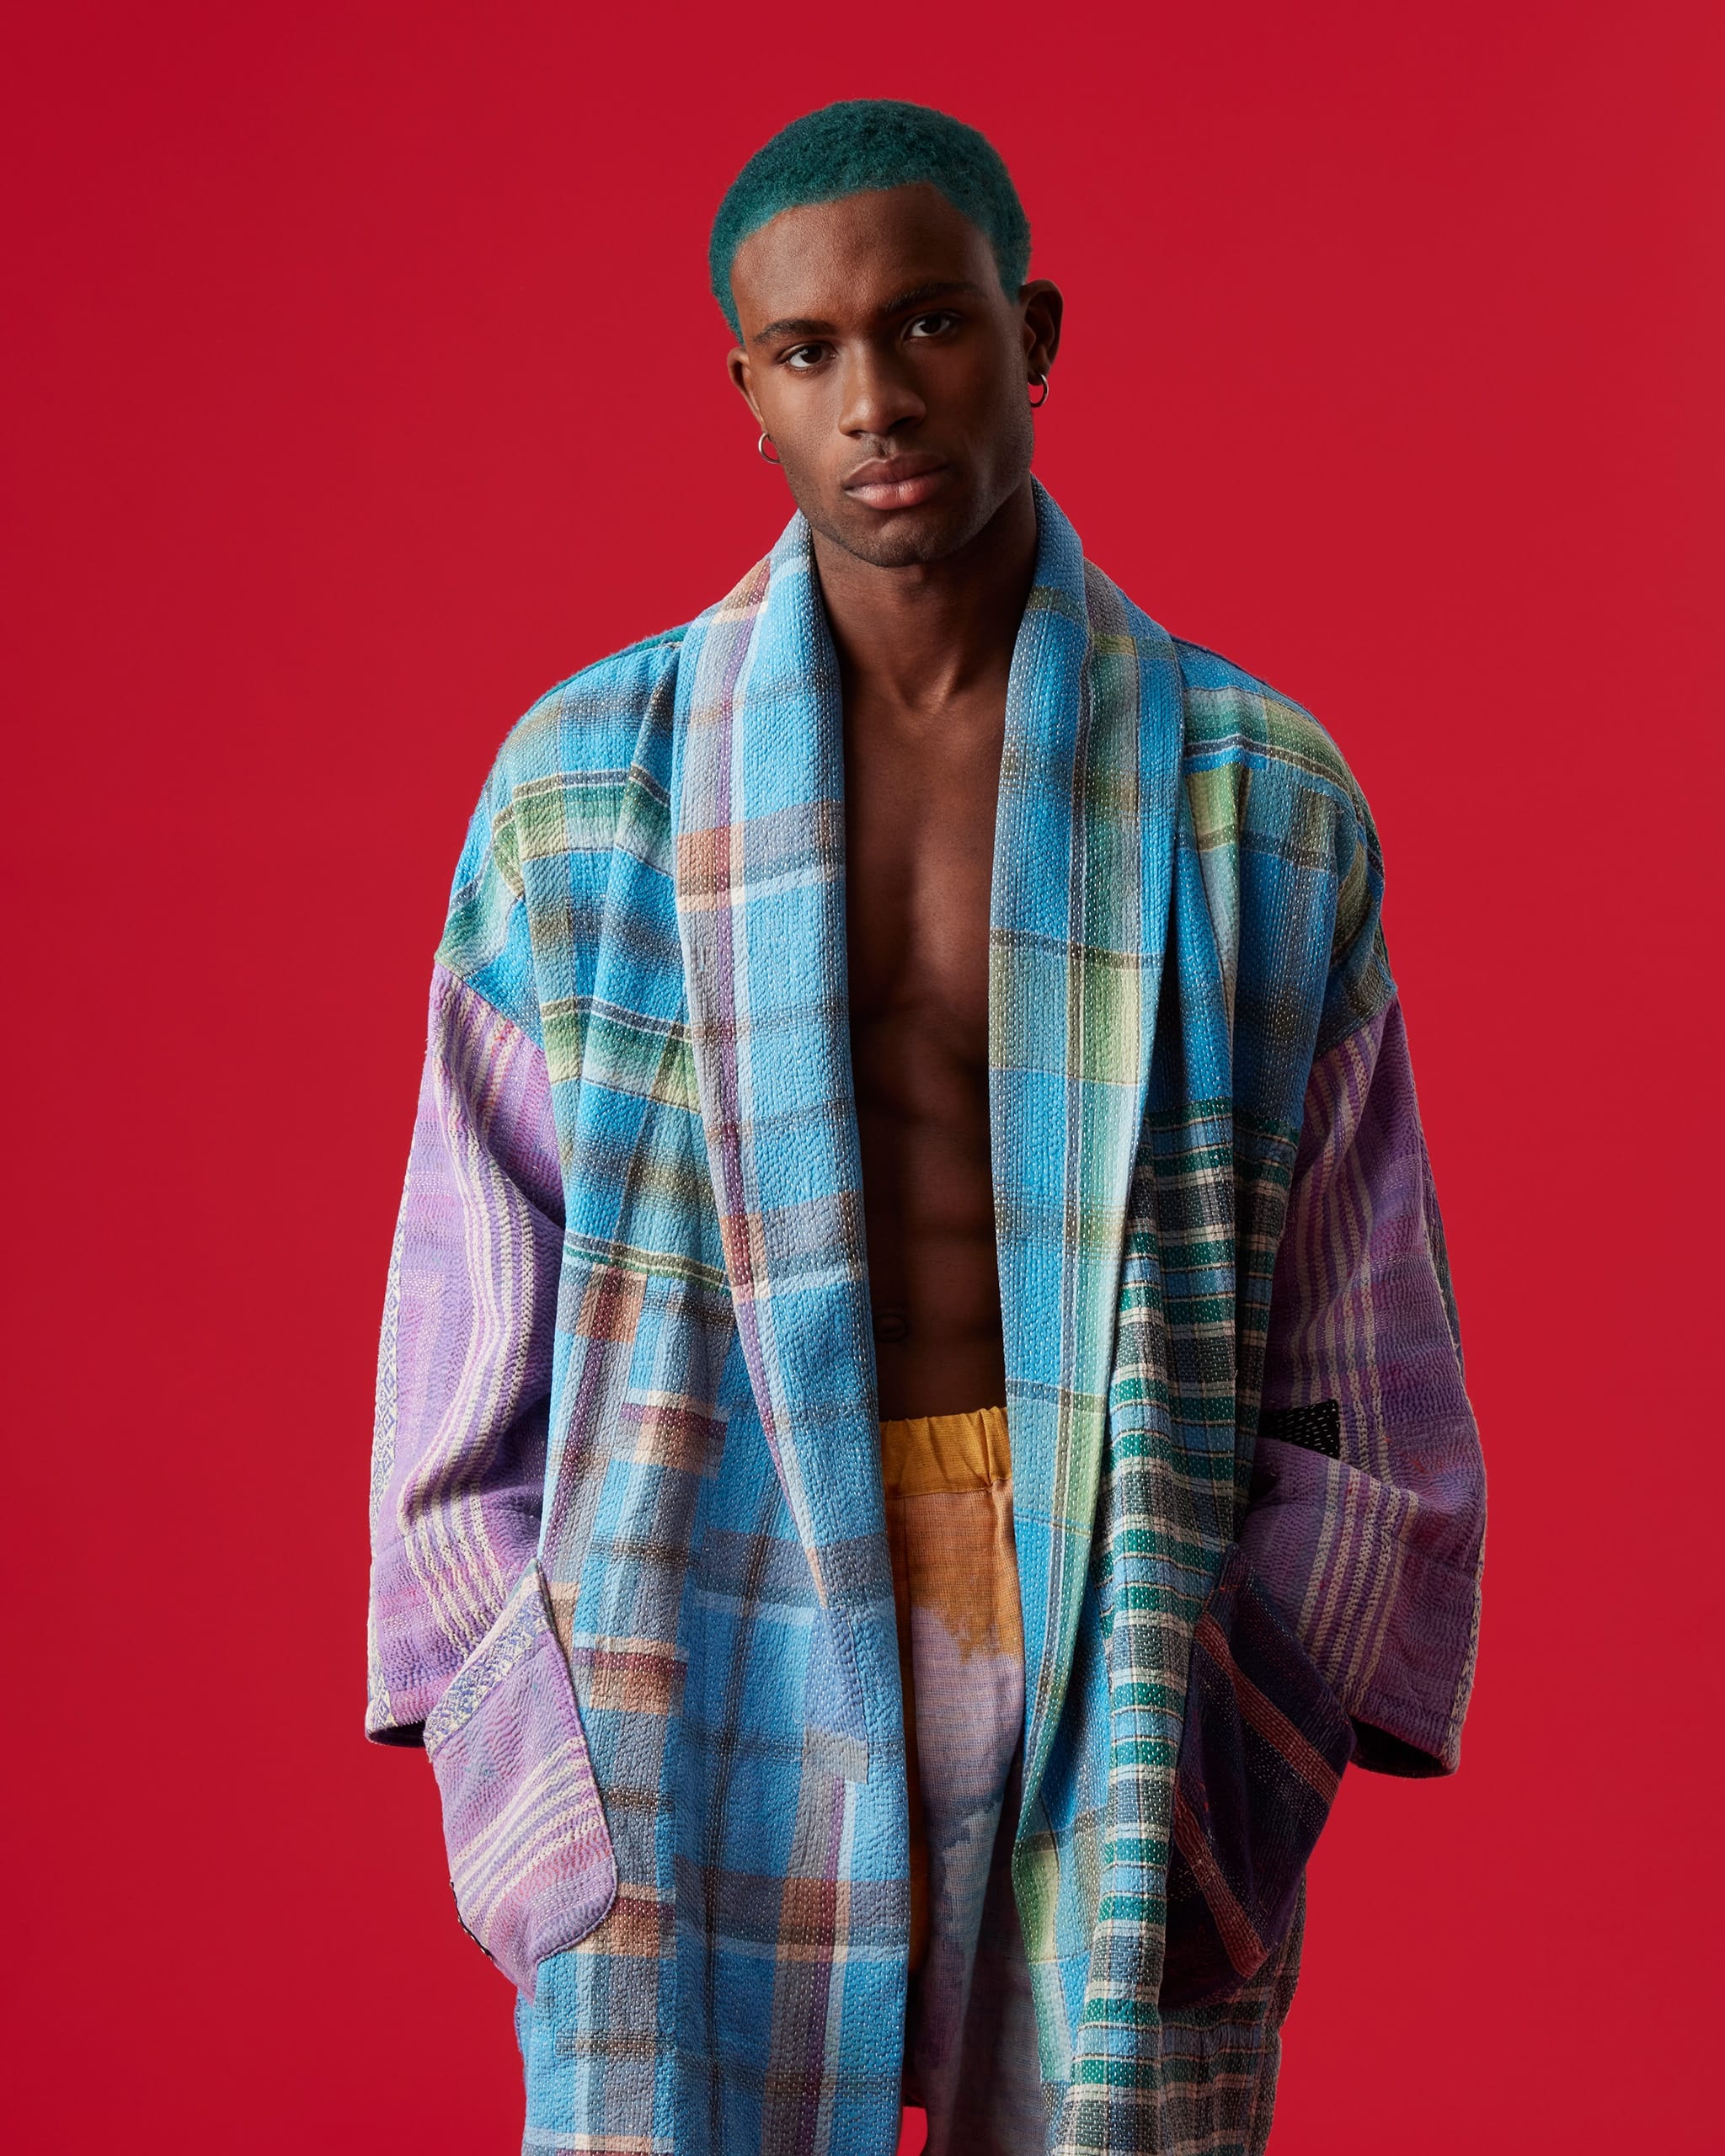 A male model with close-cropped hair that has been dyed blue looks directly at the camera, wearing a multi-coloured plaid overcoat. His hands are in the overcoat pockets, and he is standing in front of a solid red wall.